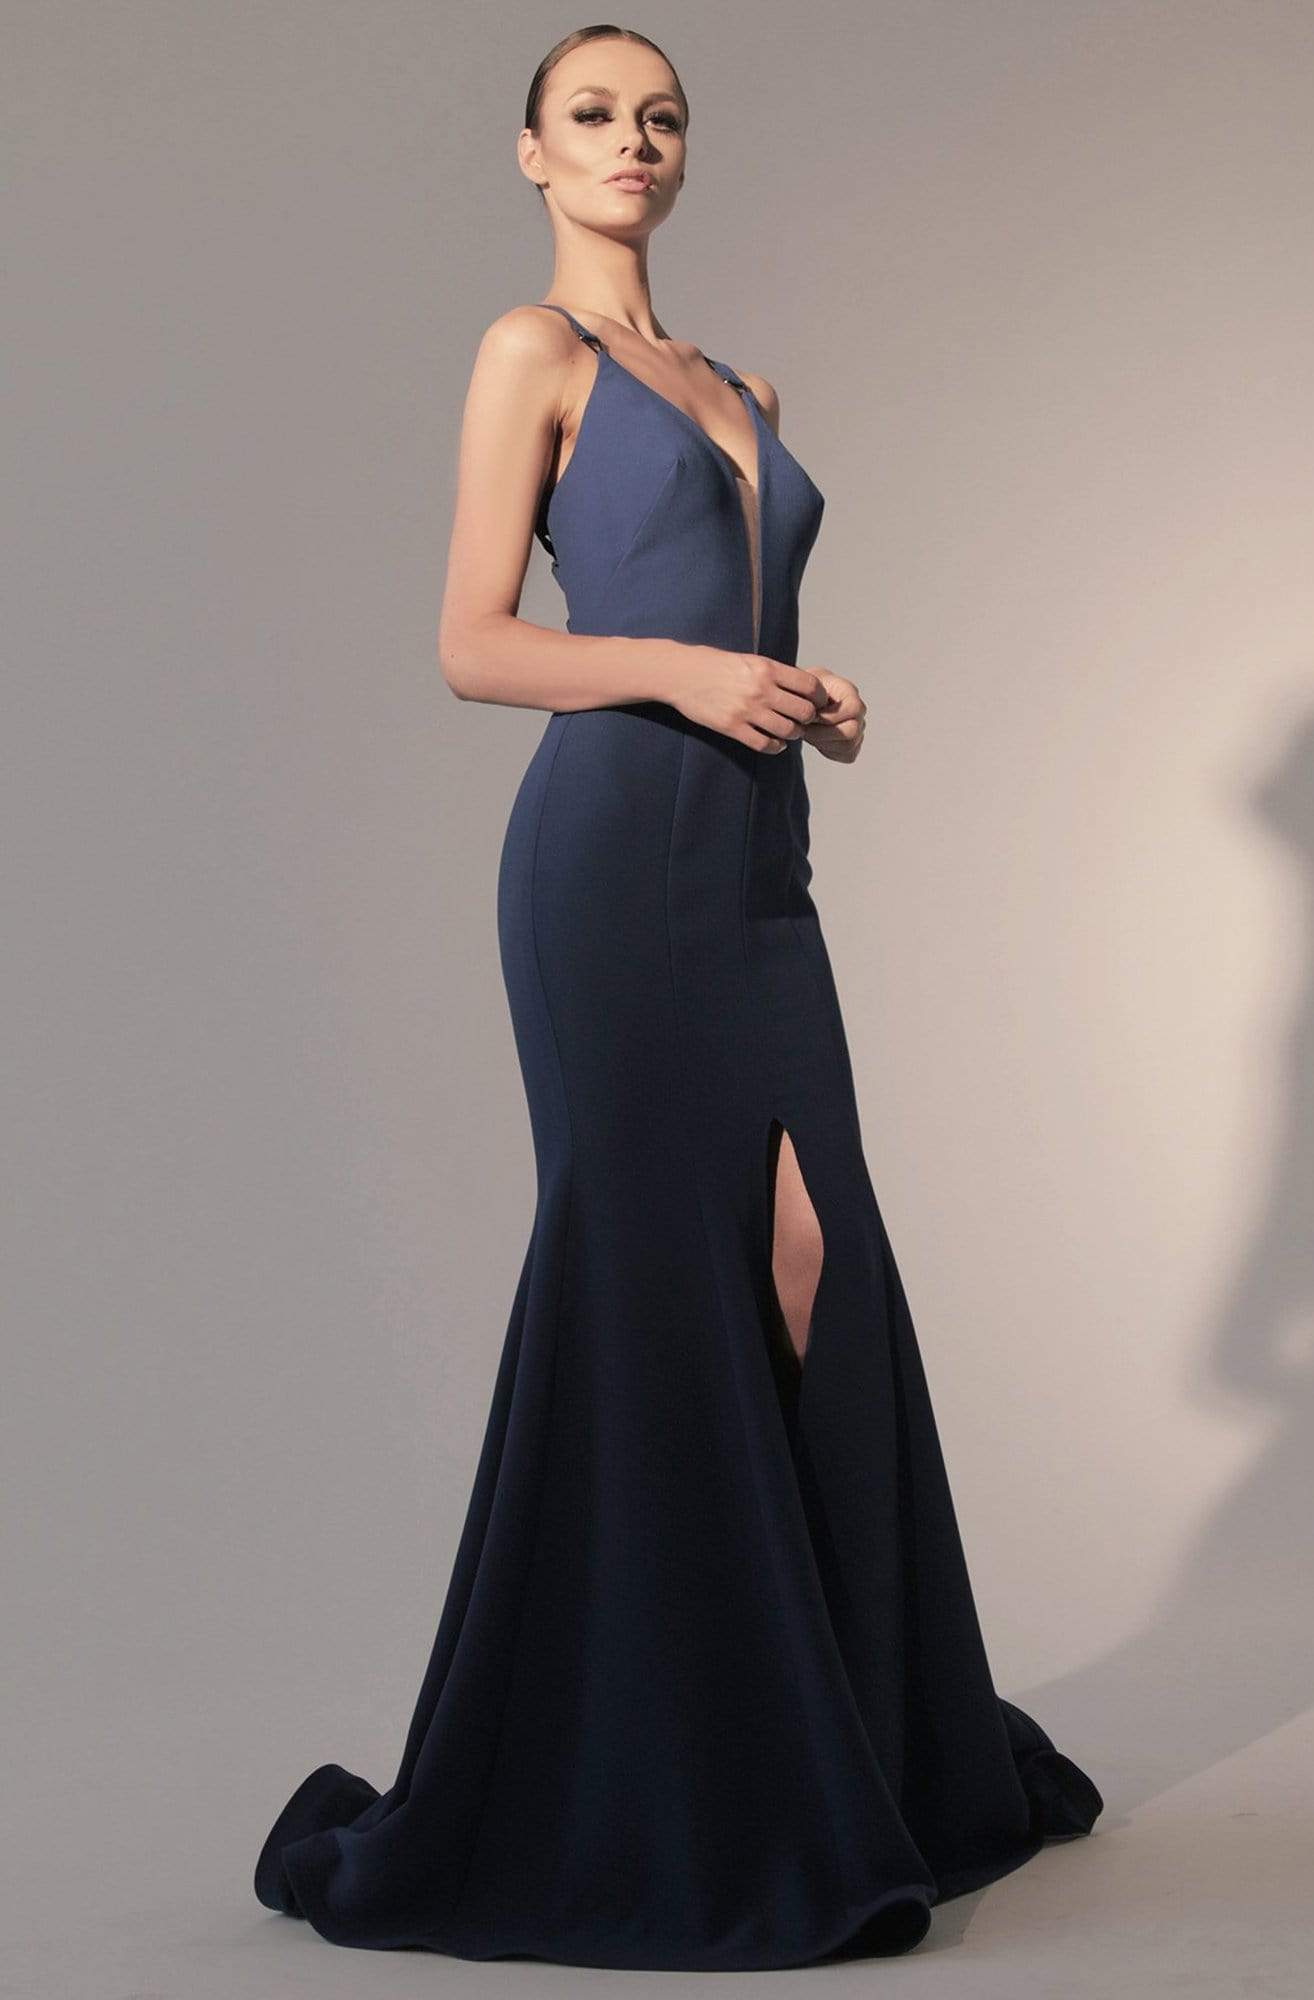 Image of Nicole Bakti - 582 Illusion Plunged Neckline Strappy Back Mermaid Gown